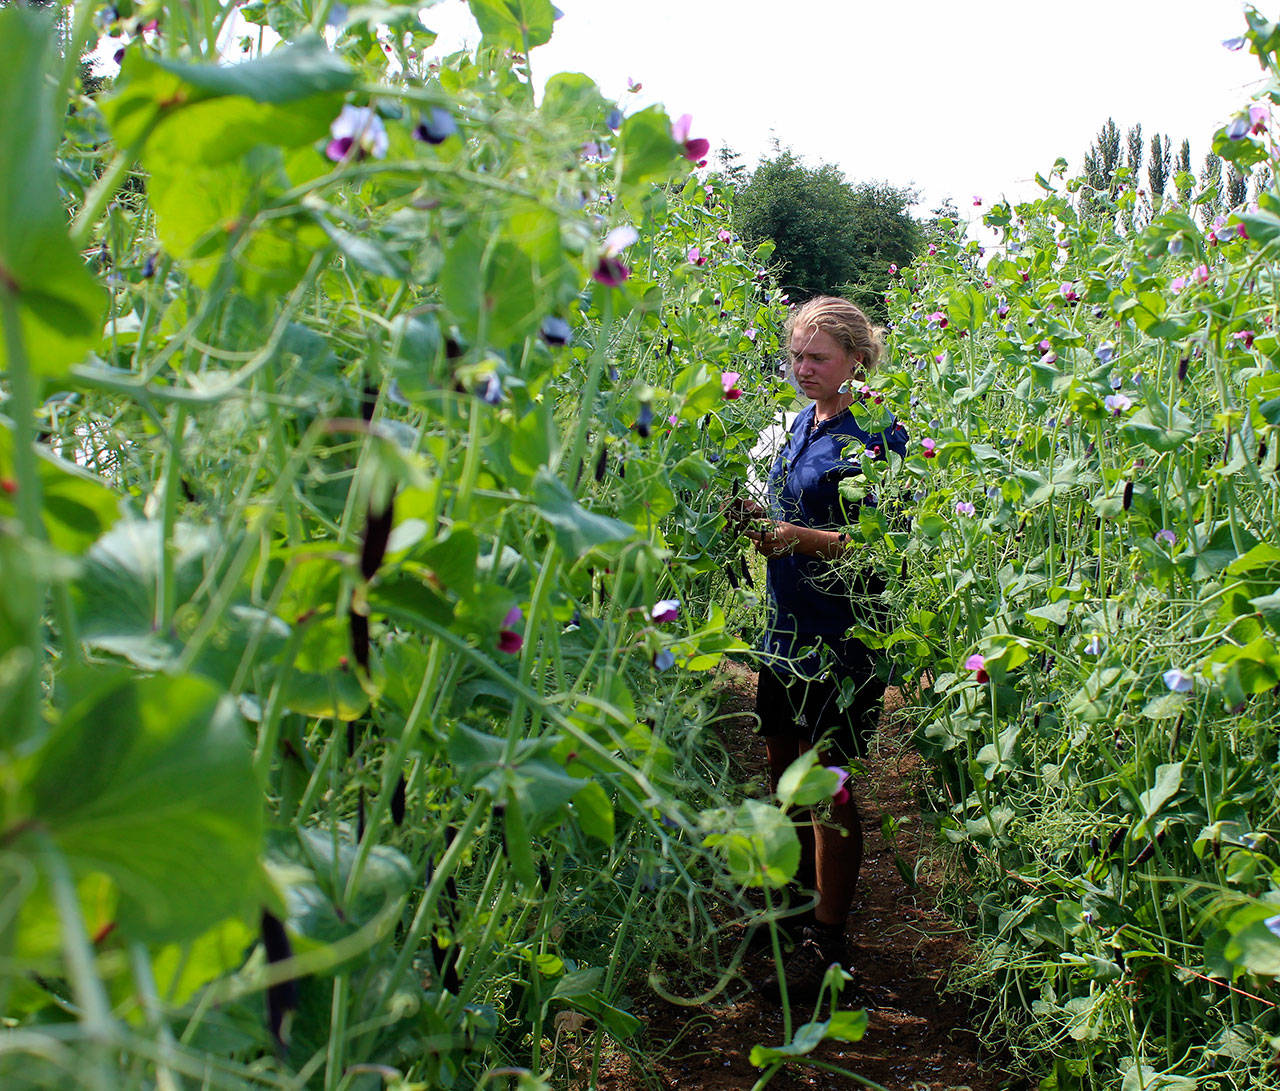 Organic Farm School student Corbin Scholz checks out vines of sweet peas to see if they are ready to be picked. Photo by Patricia Guthrie/Whidbey News Group